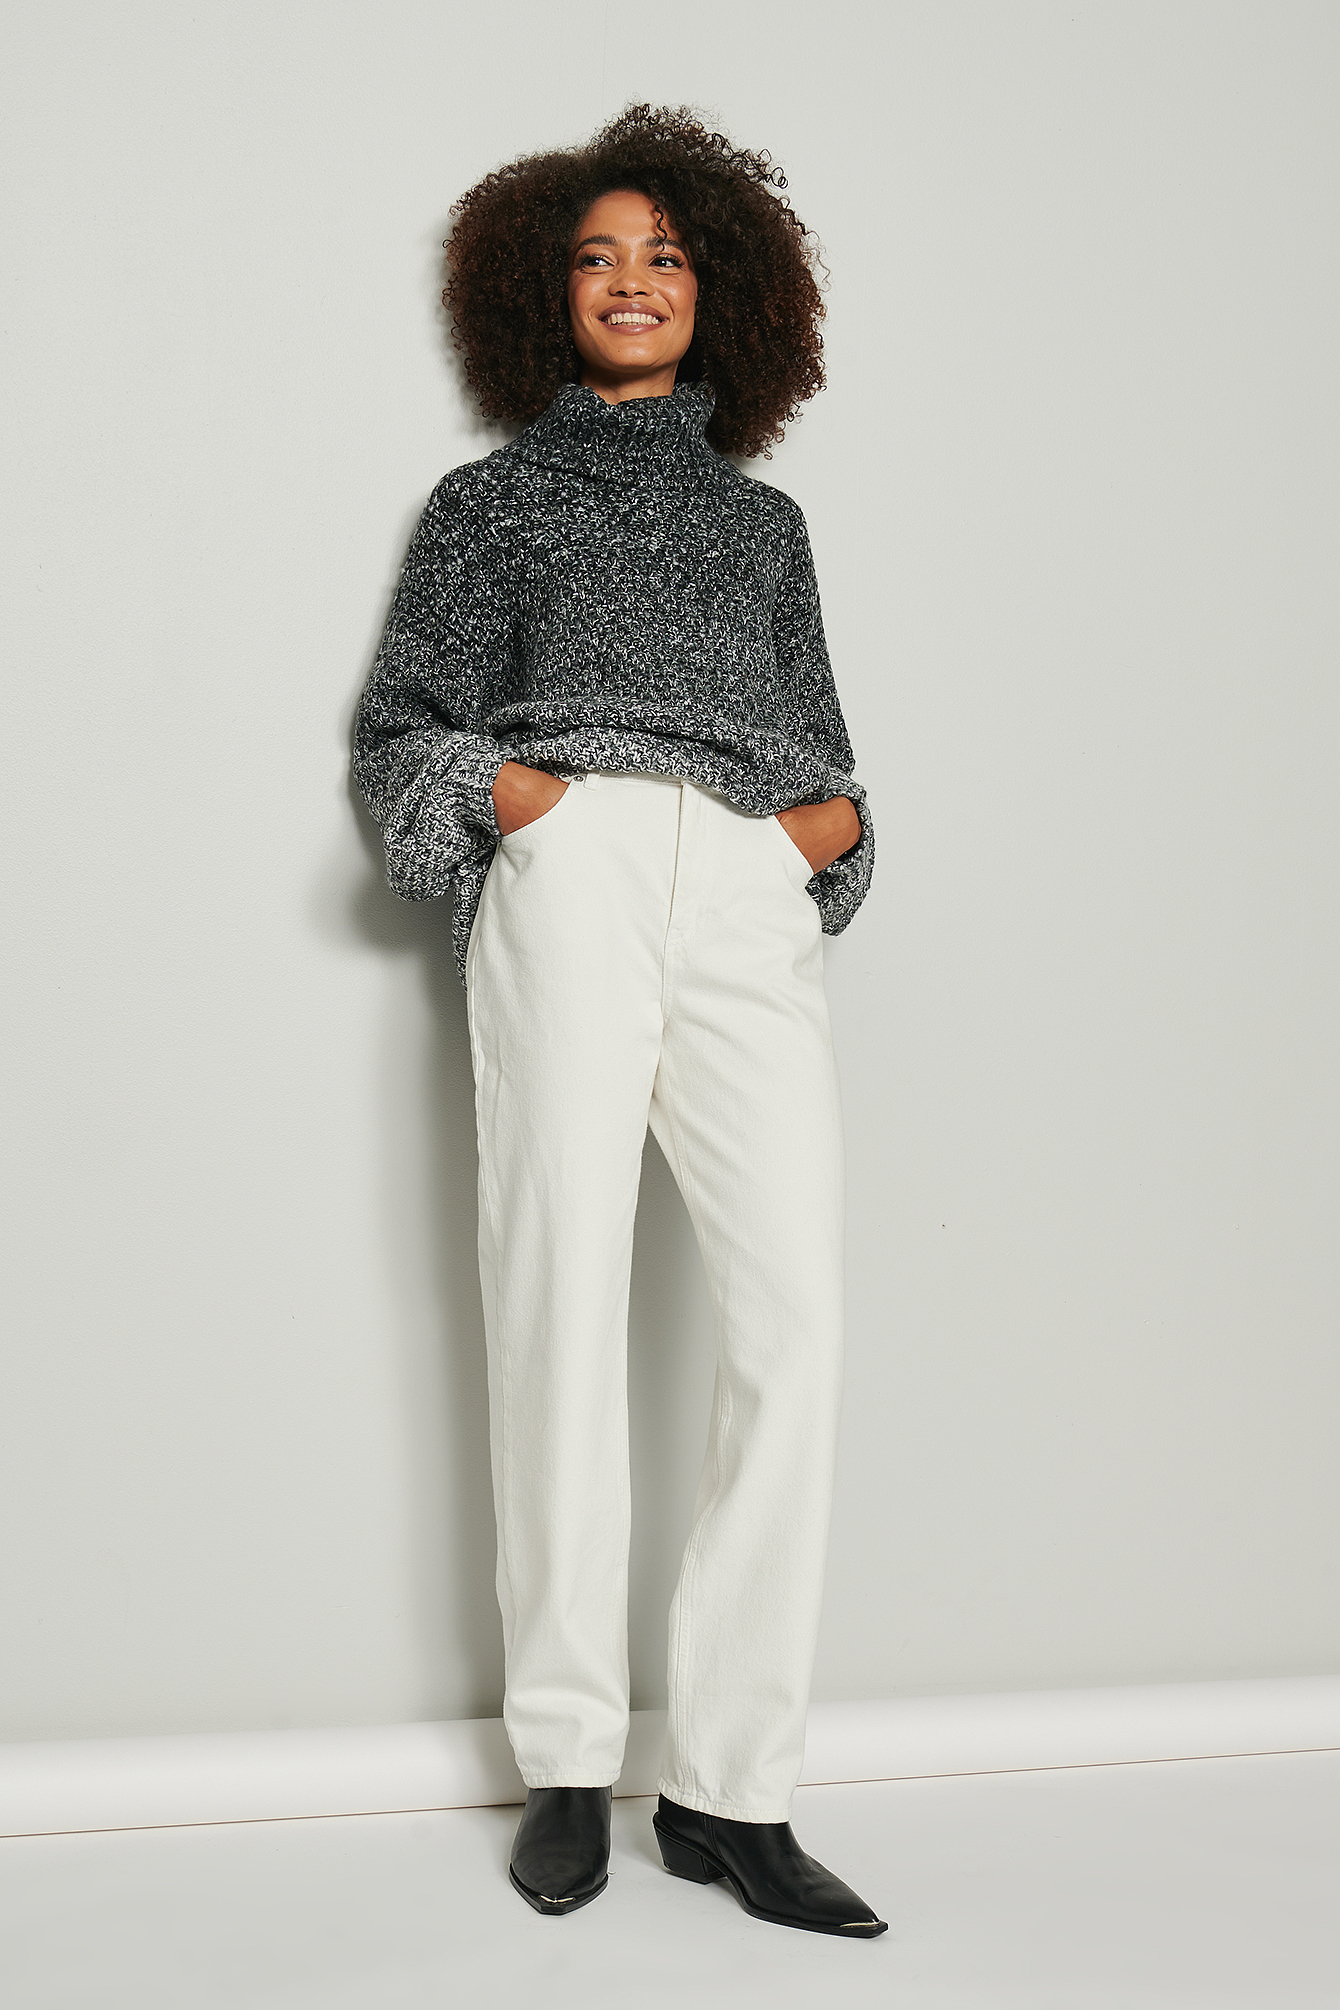 Knitted Turtle Neck Oversized Mix Yarn Sweater Outfit.